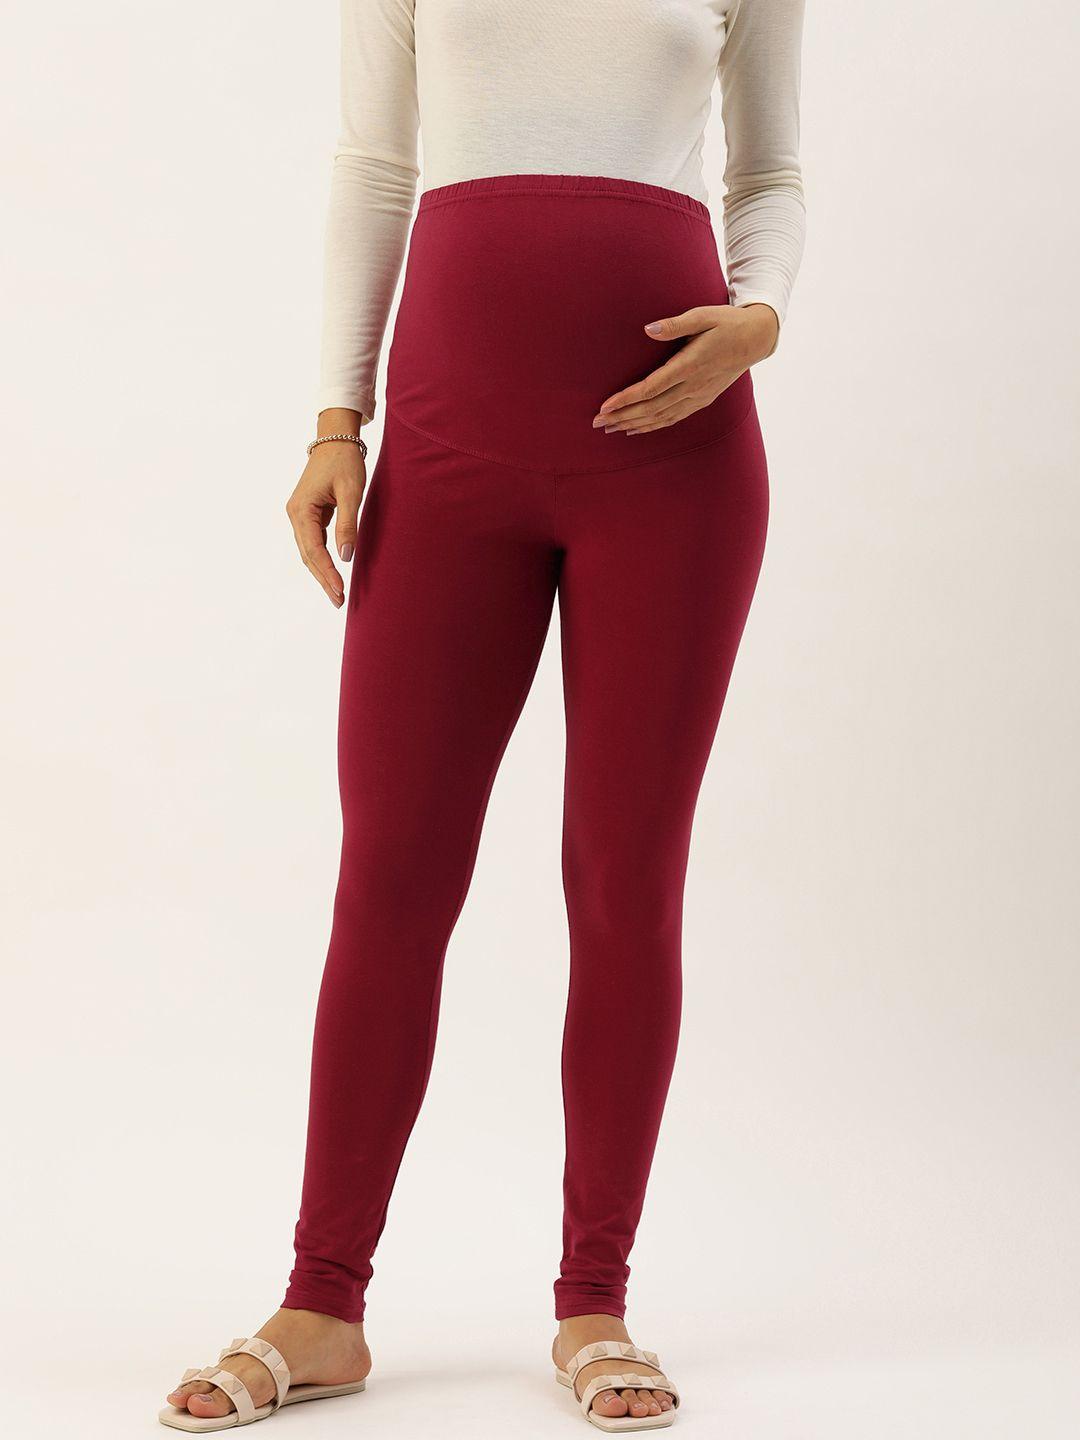 blush 9 maternity over the bump solid maternity leggings